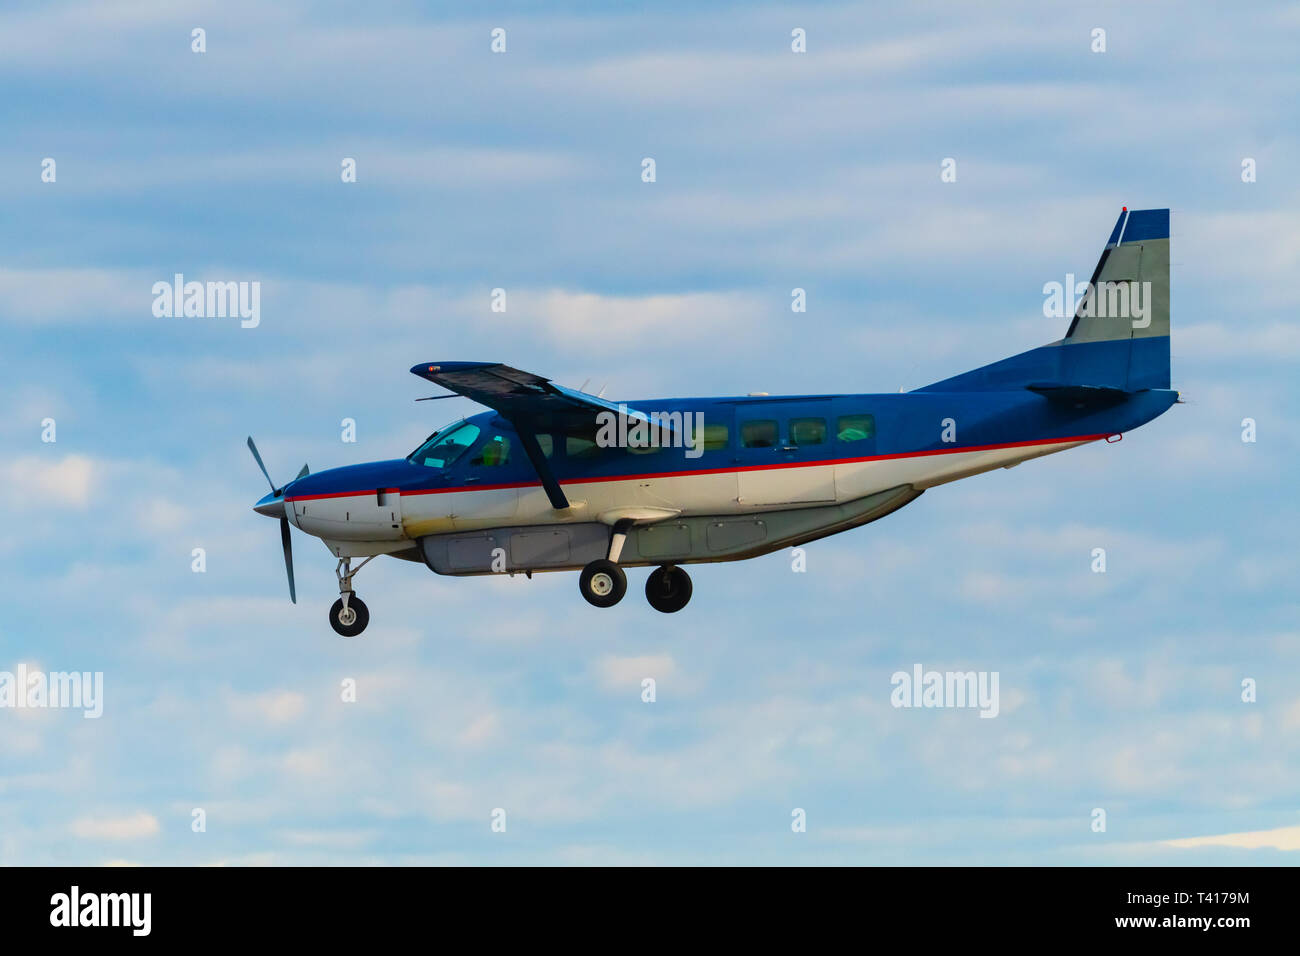 Single engine plain flying in the sky, British Columbia, Canada Stock Photo